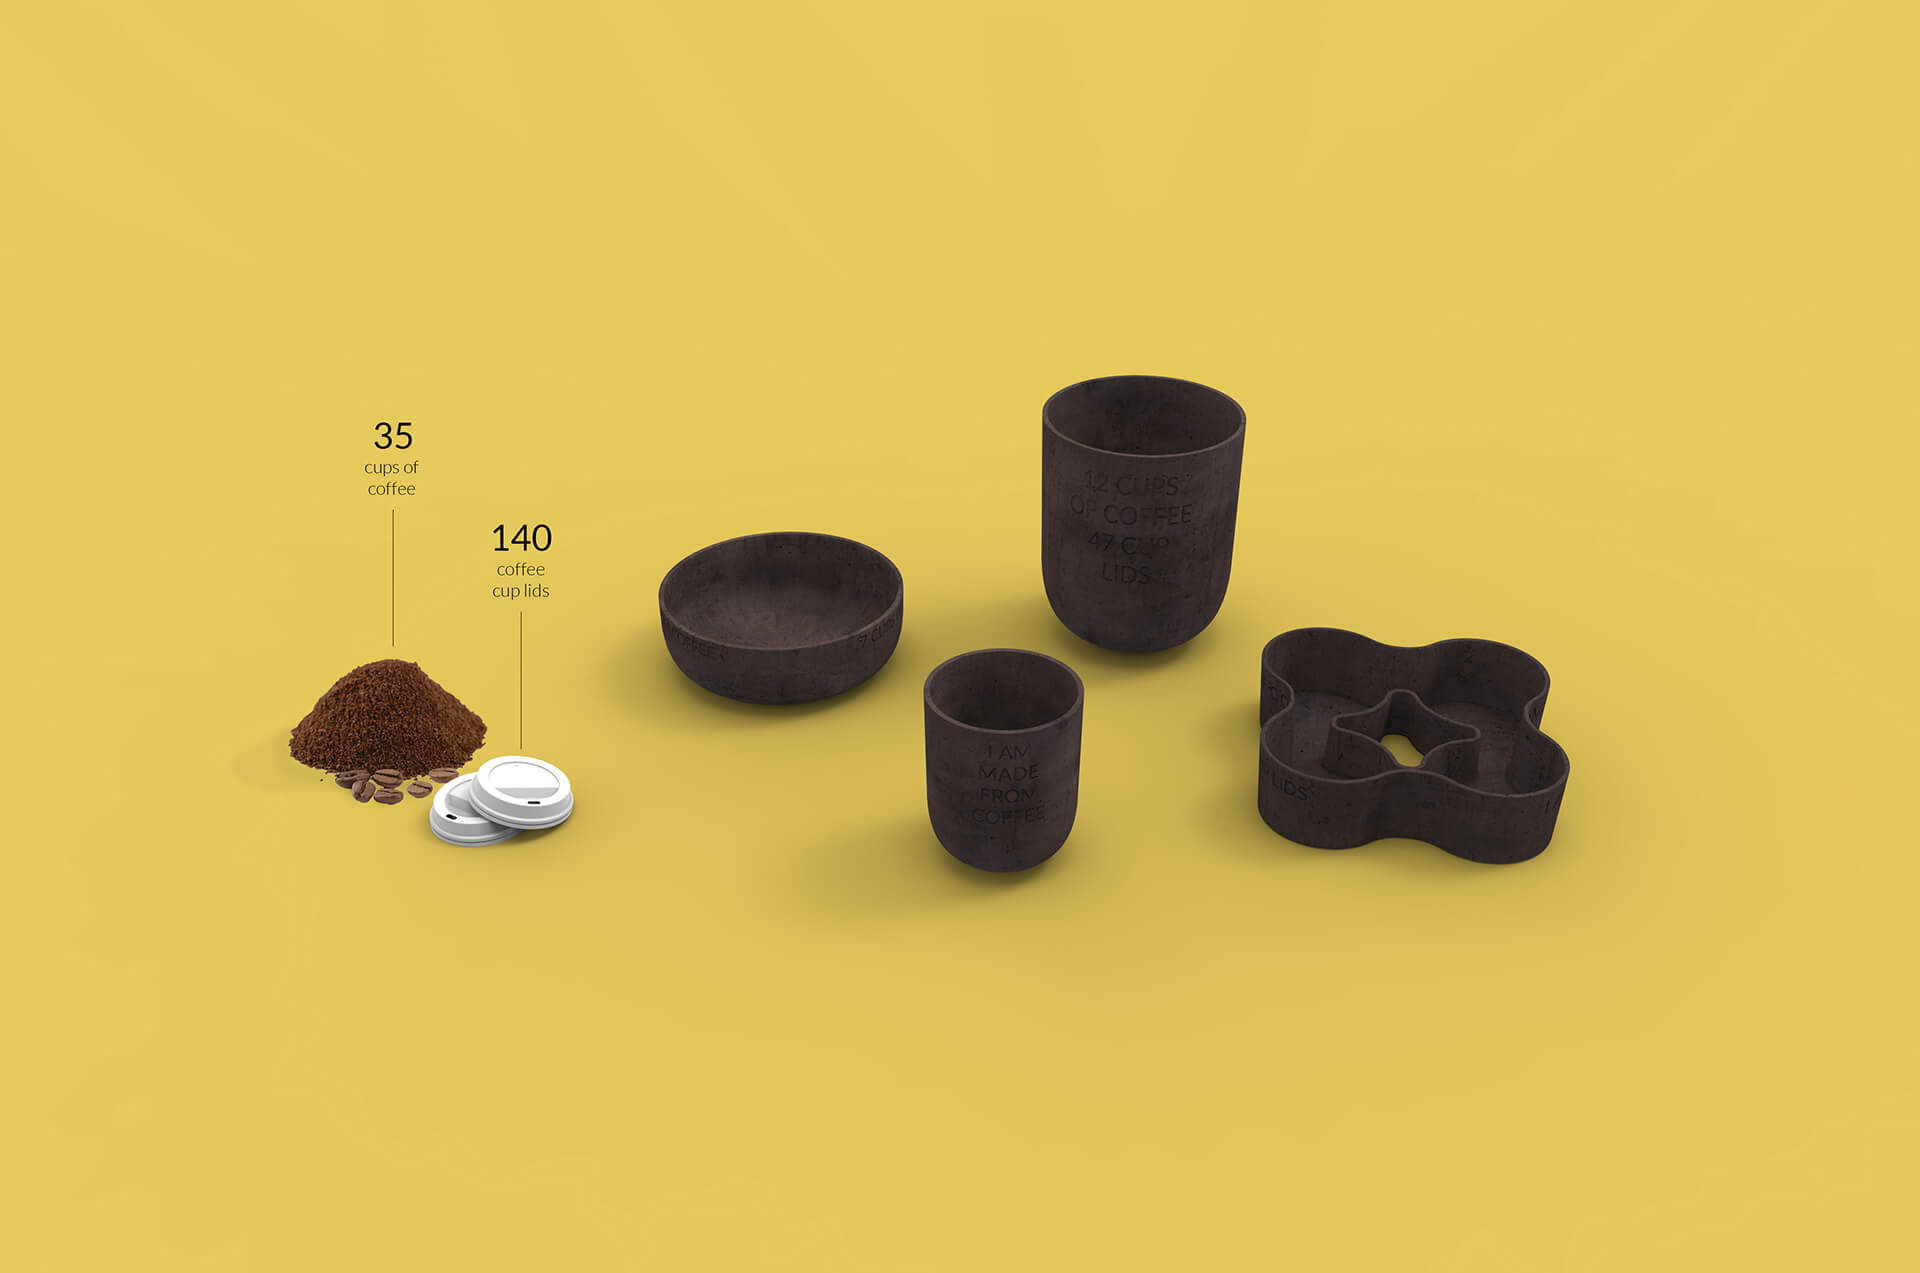 Future of sustainable materials recycled coffee grounds